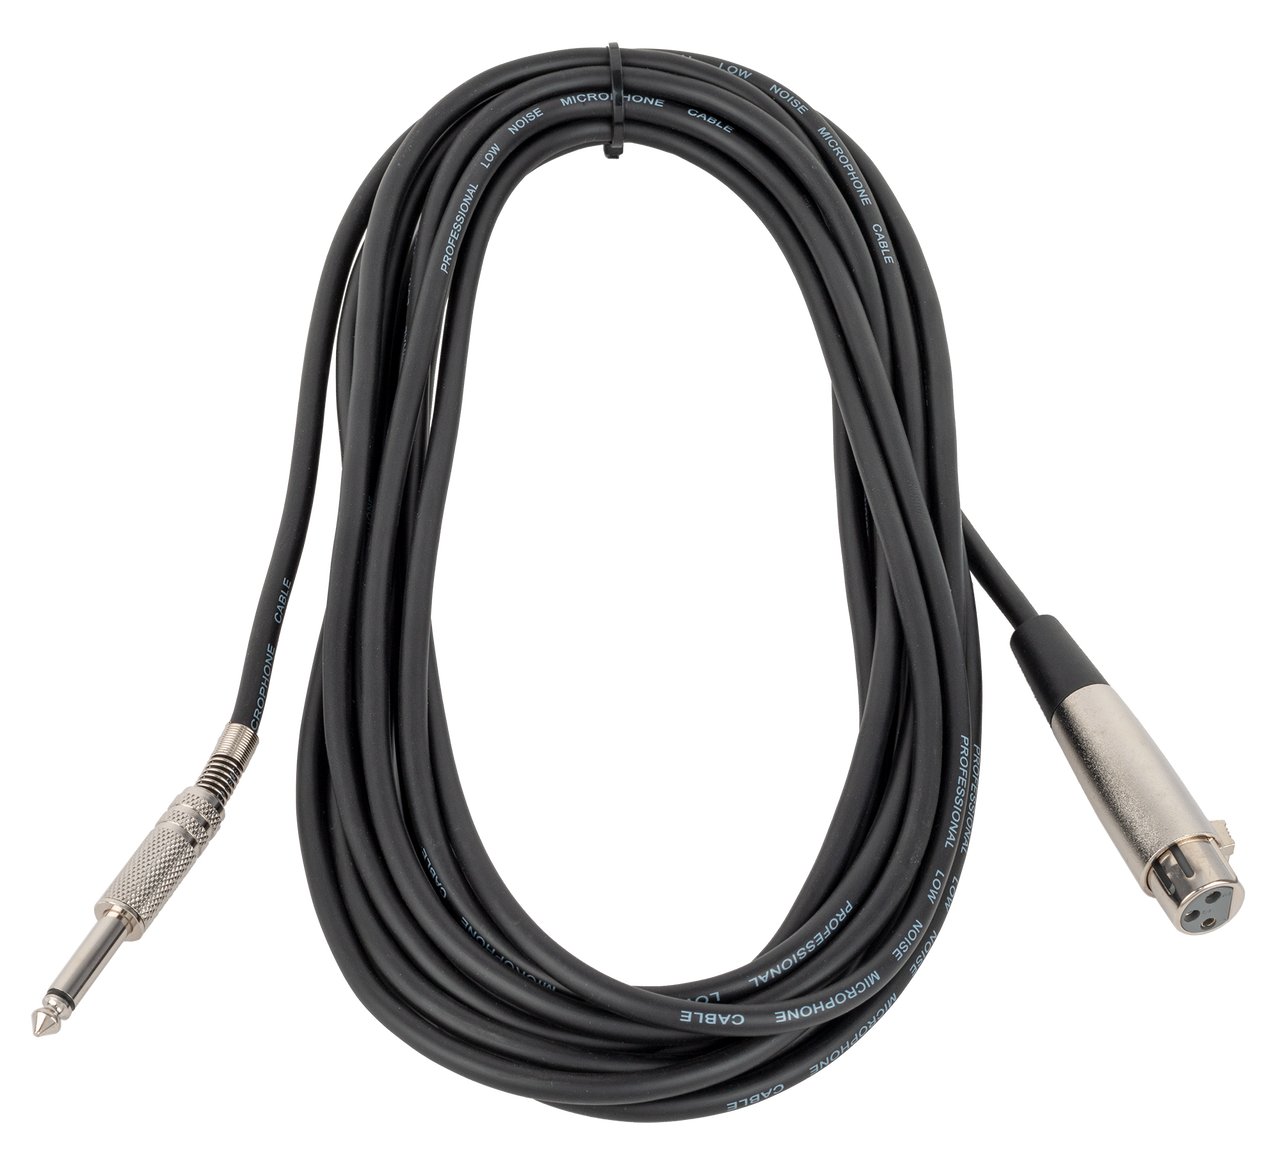 10 ft Right Angle Instrument Cable